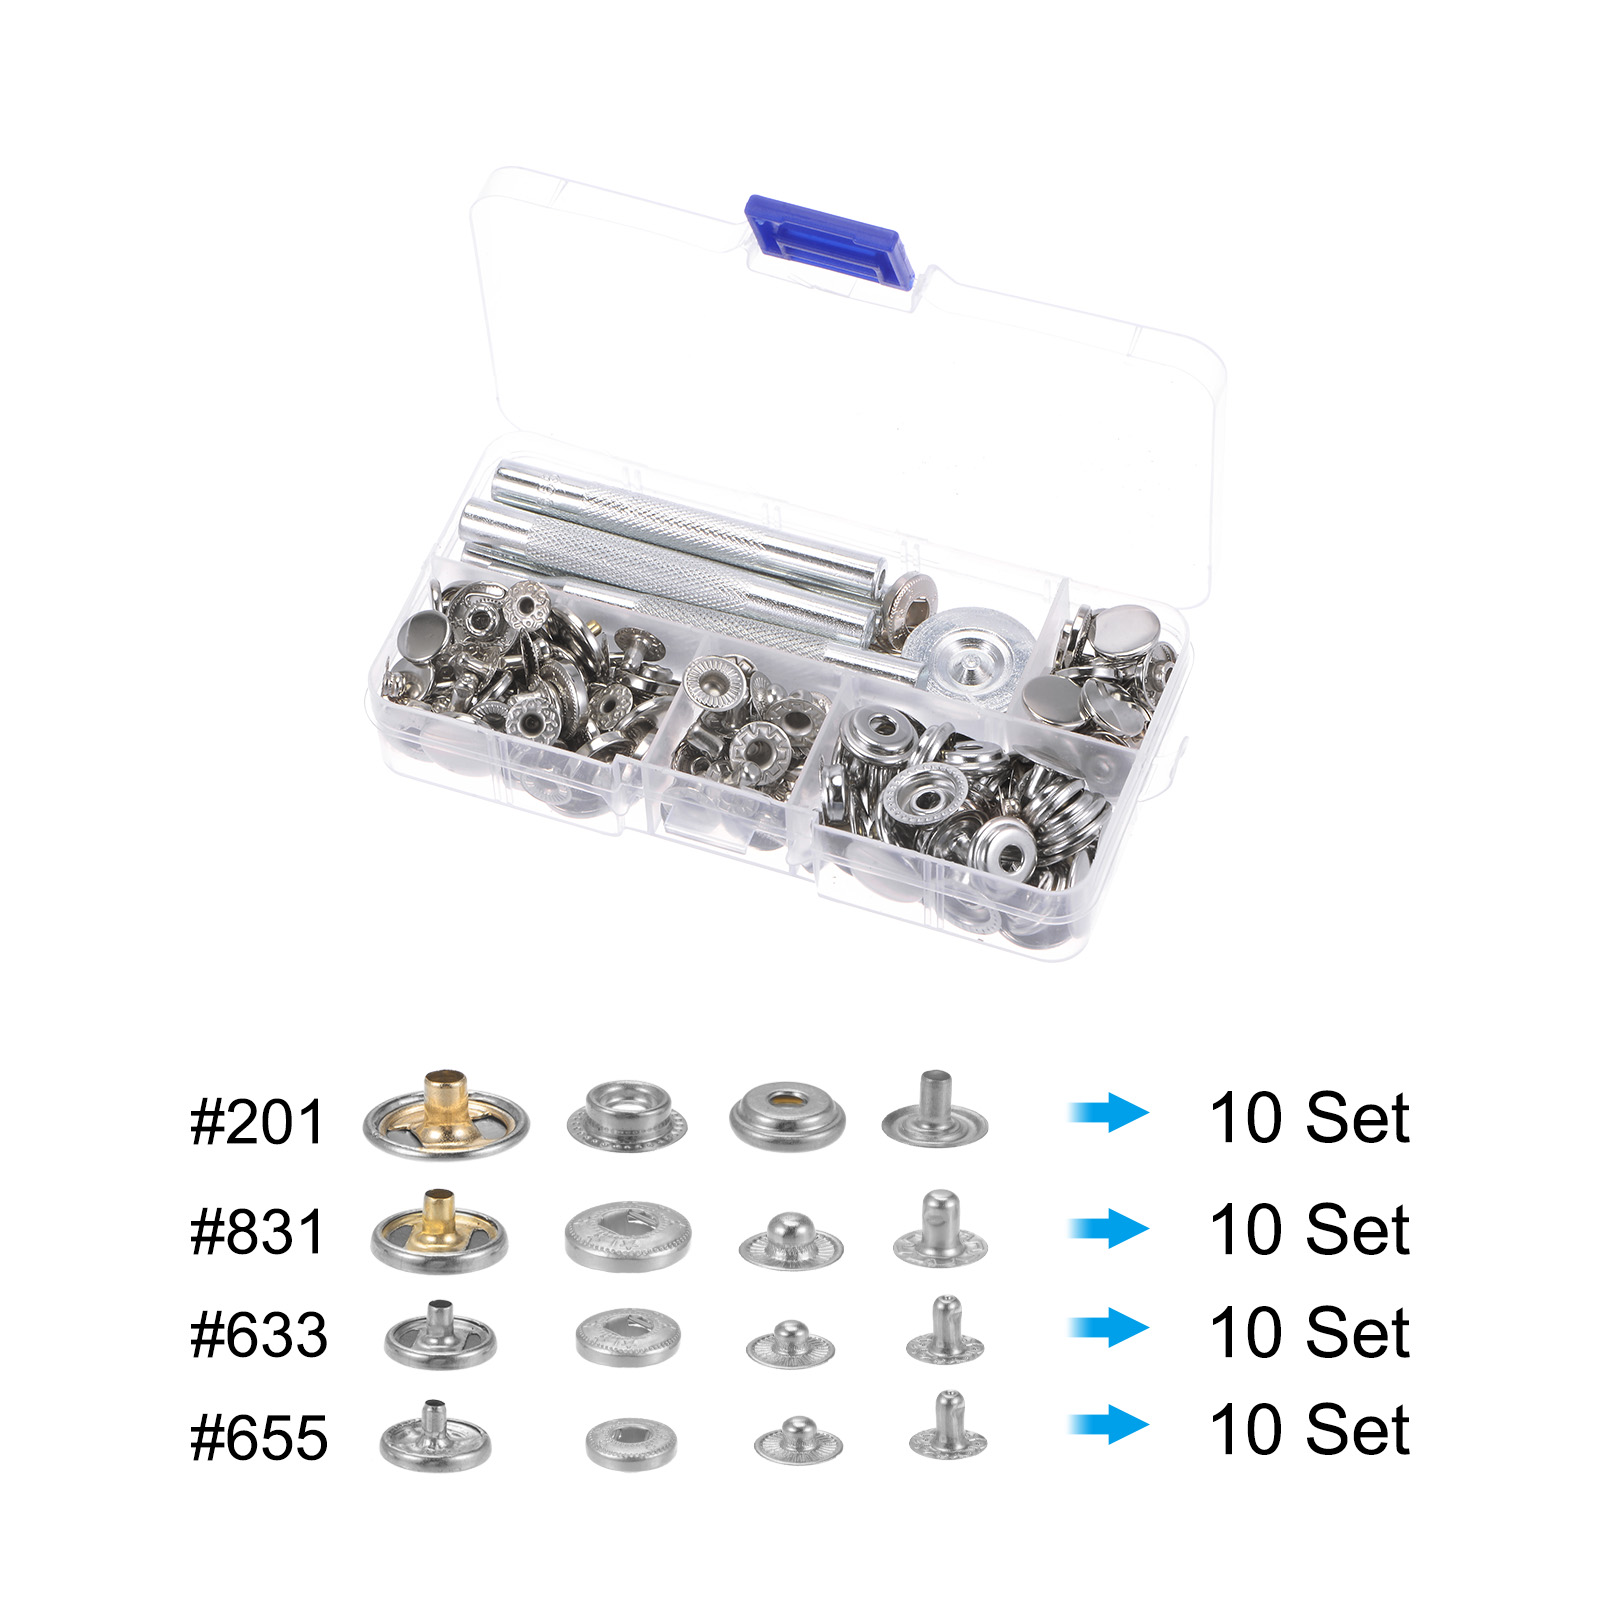 Unique Bargains 40 Sets Snap Fasteners Kit 4 Type Copper with 9 Setter Tools & Box, Silver Tone